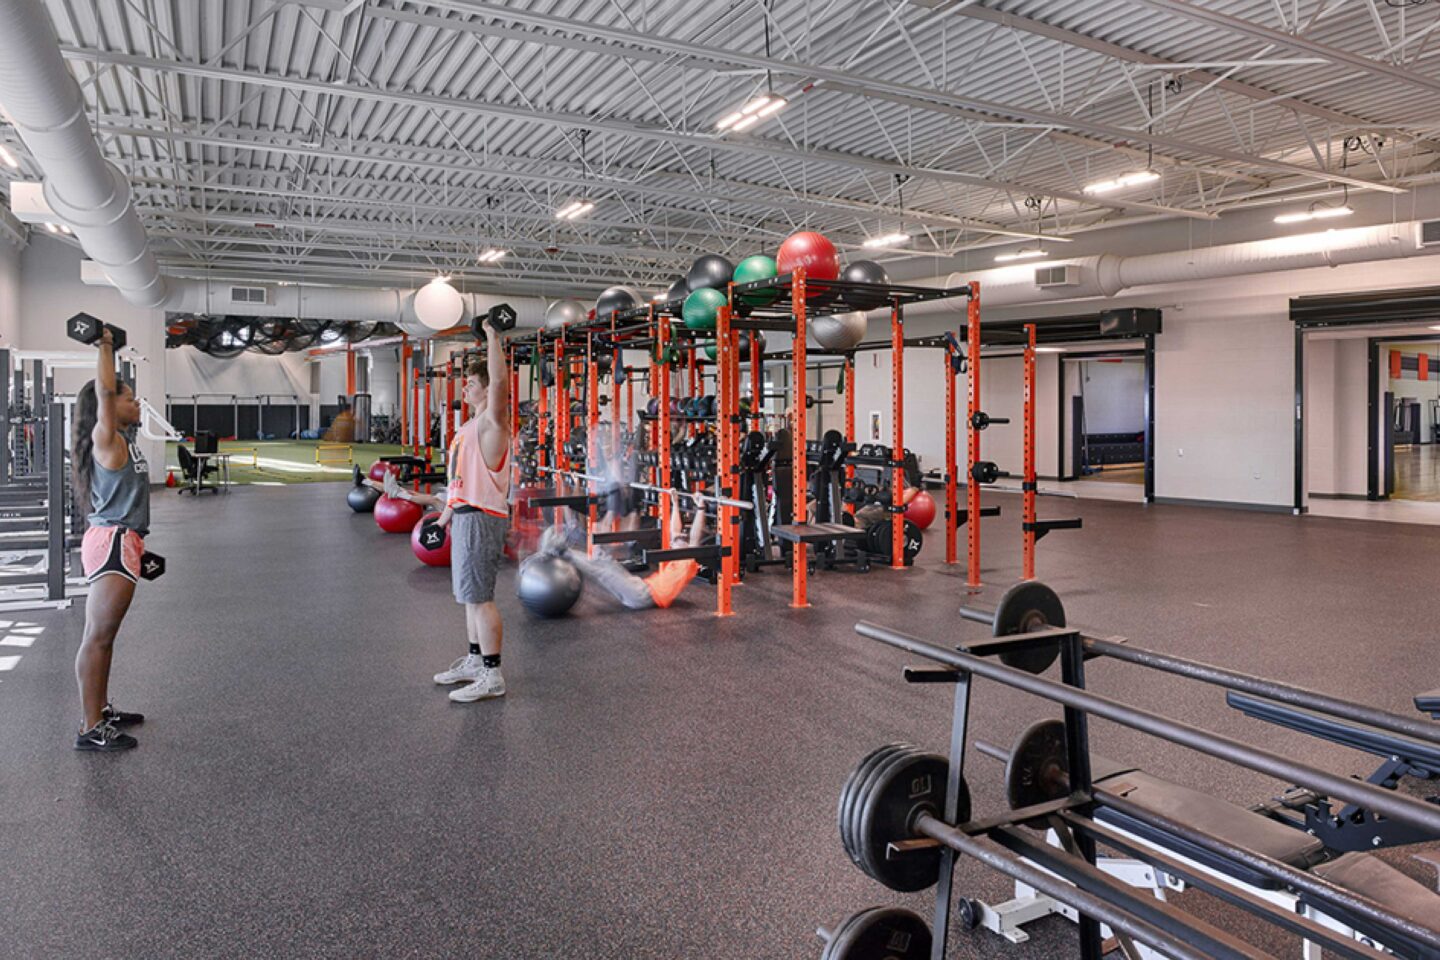 Students lift weights in the new fitness center, with glimpses into the adjacent indoor turf area and gymnasium